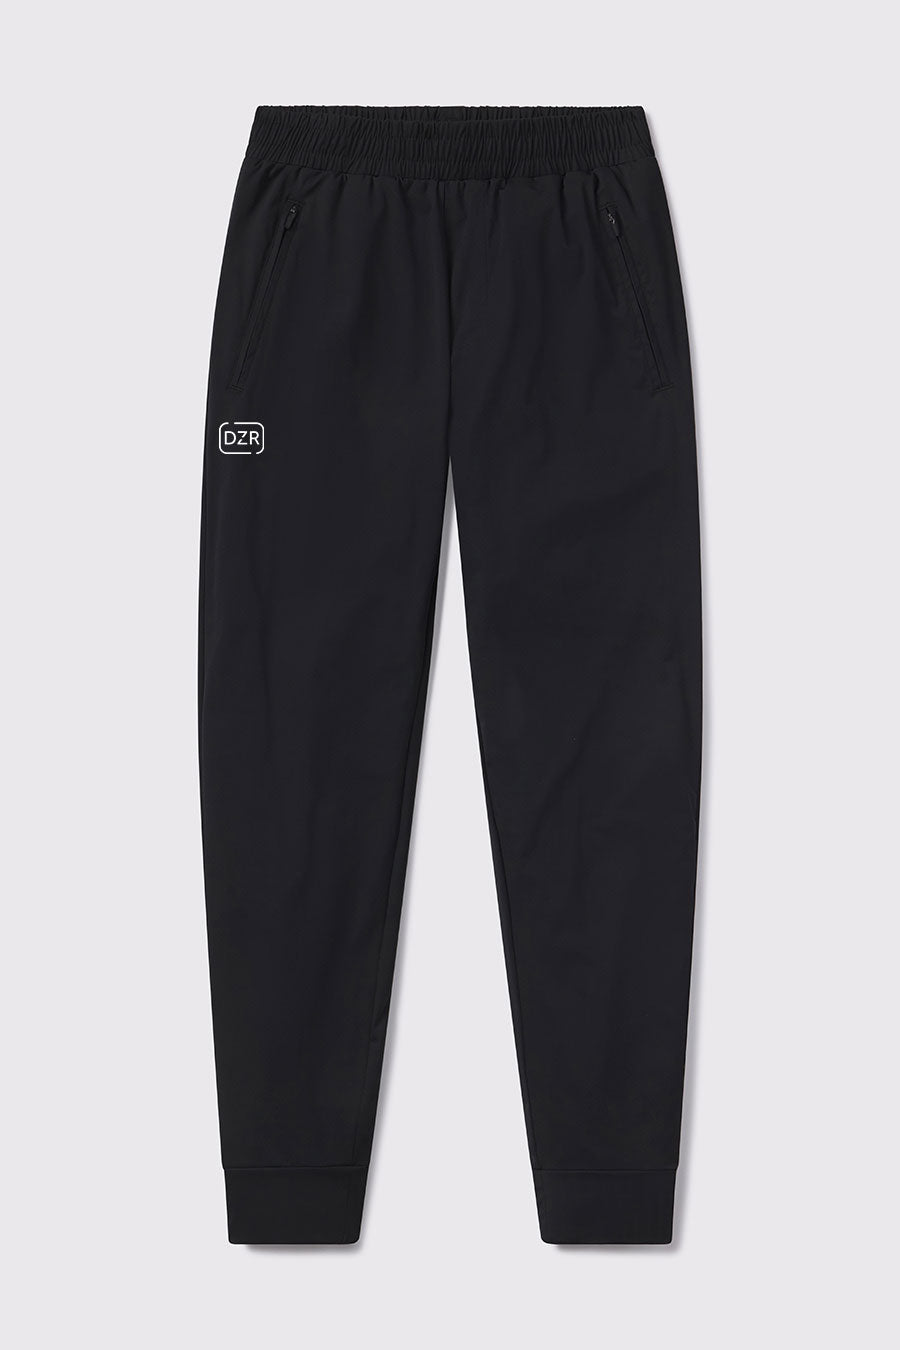 Dozer Ultralight Jogger - Black - photo from front flat lay #color_black